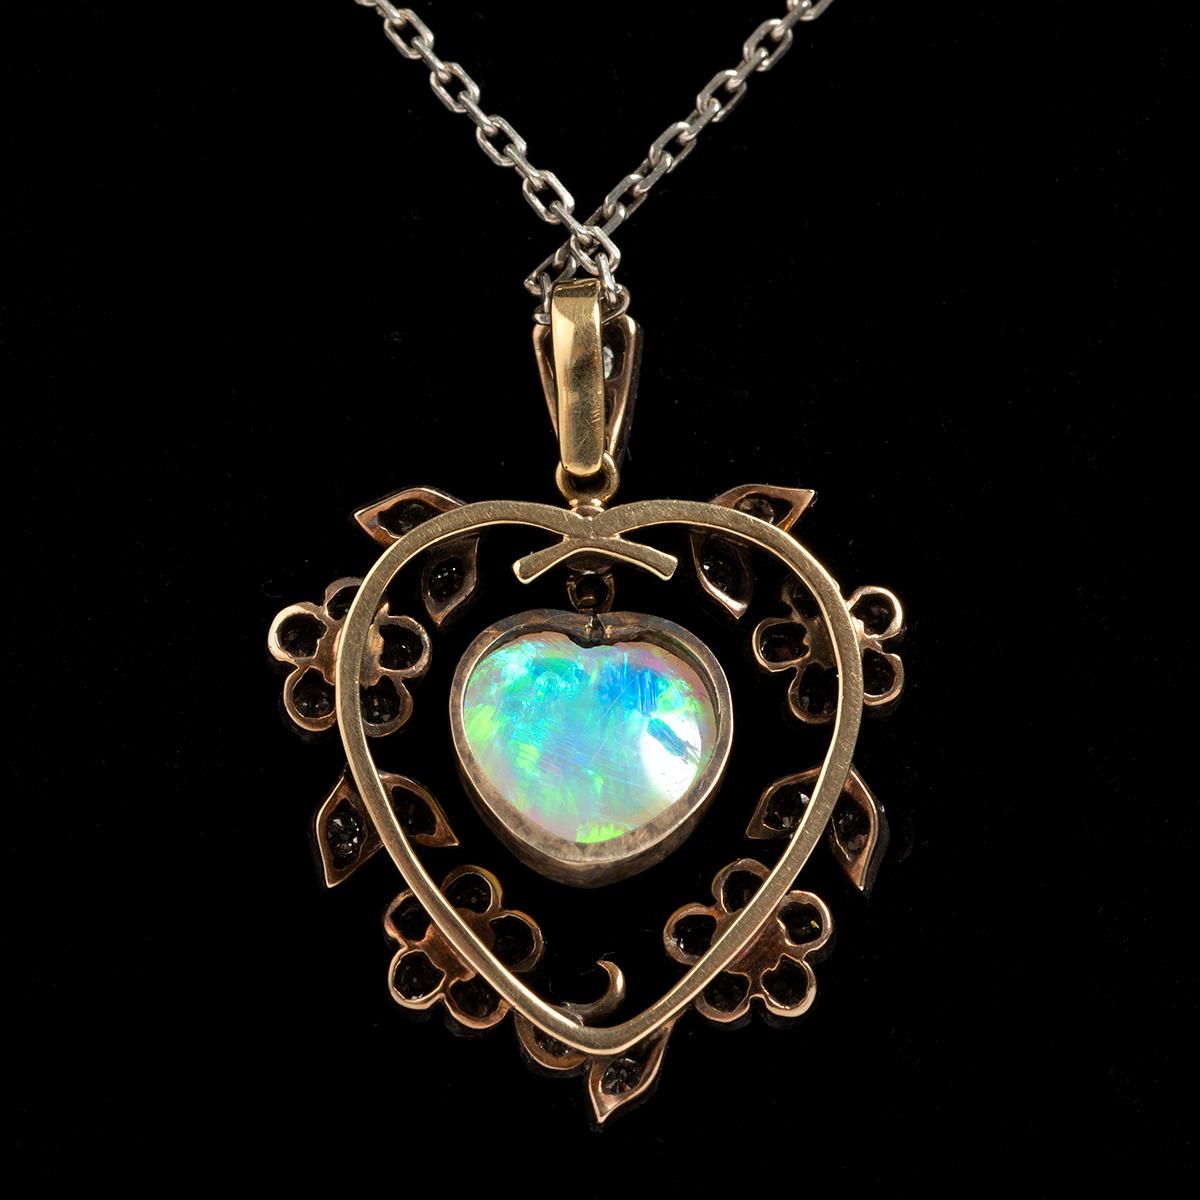 Women's Victorian 18 Carat White Gold Necklace with Diamonds, Emeralds and Opal Stone. For Sale